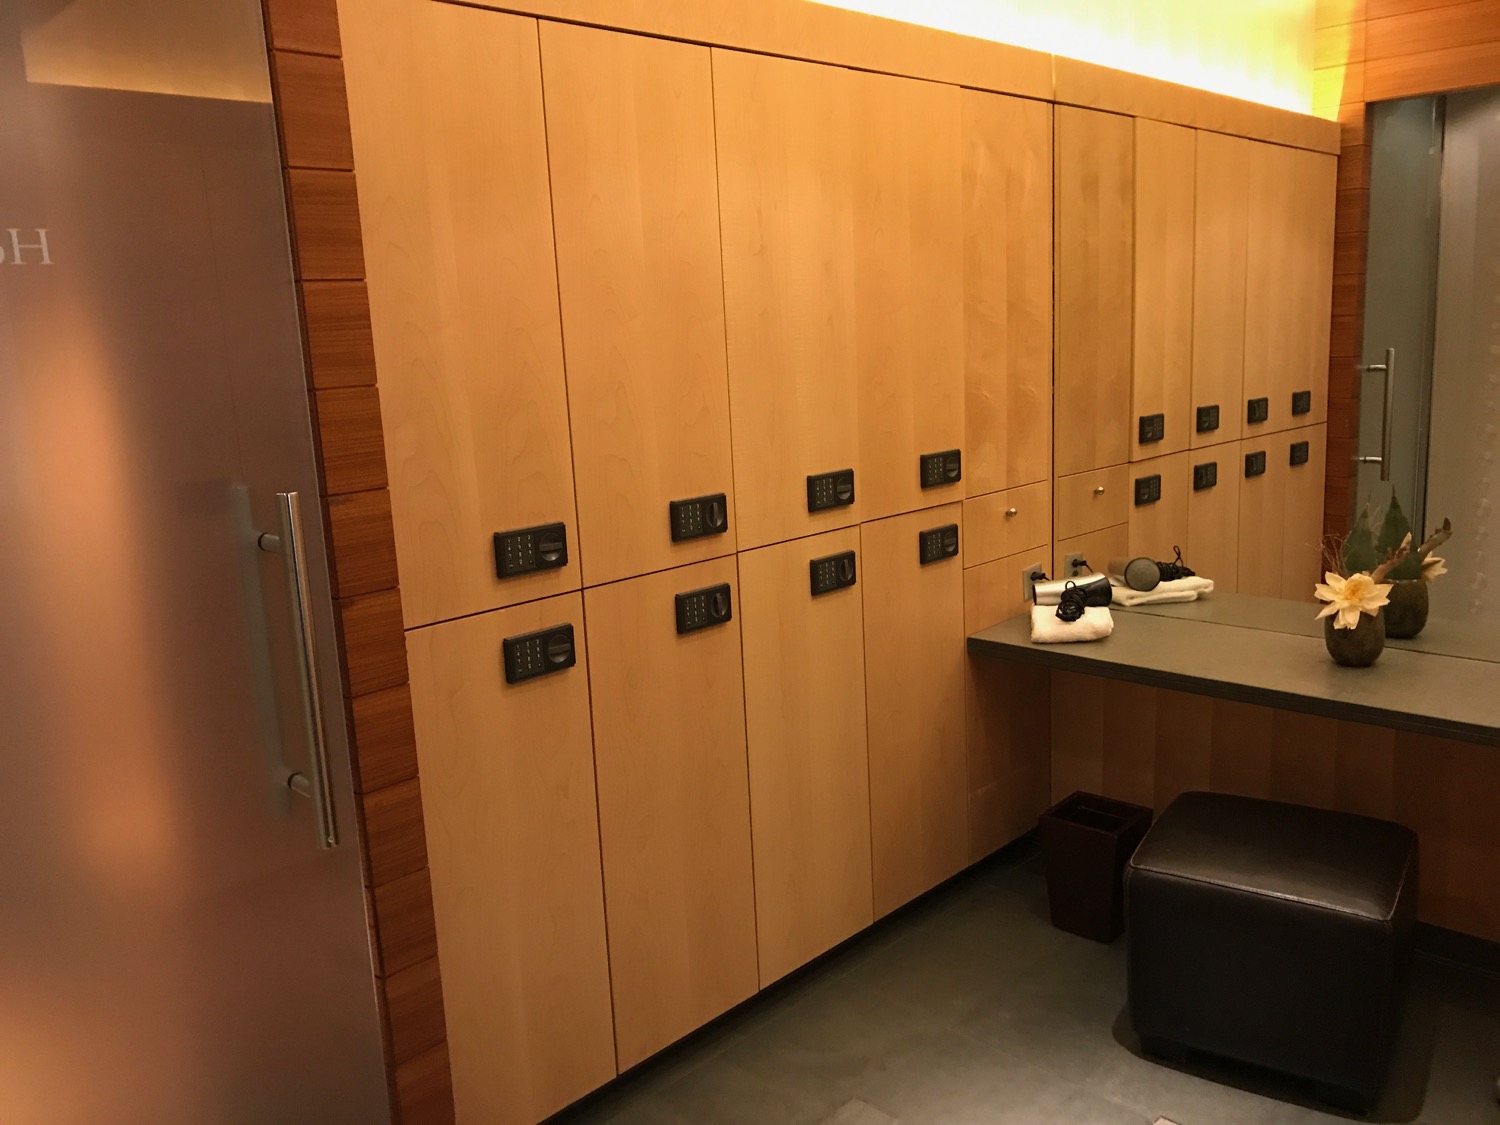 a locker room with a counter and a table